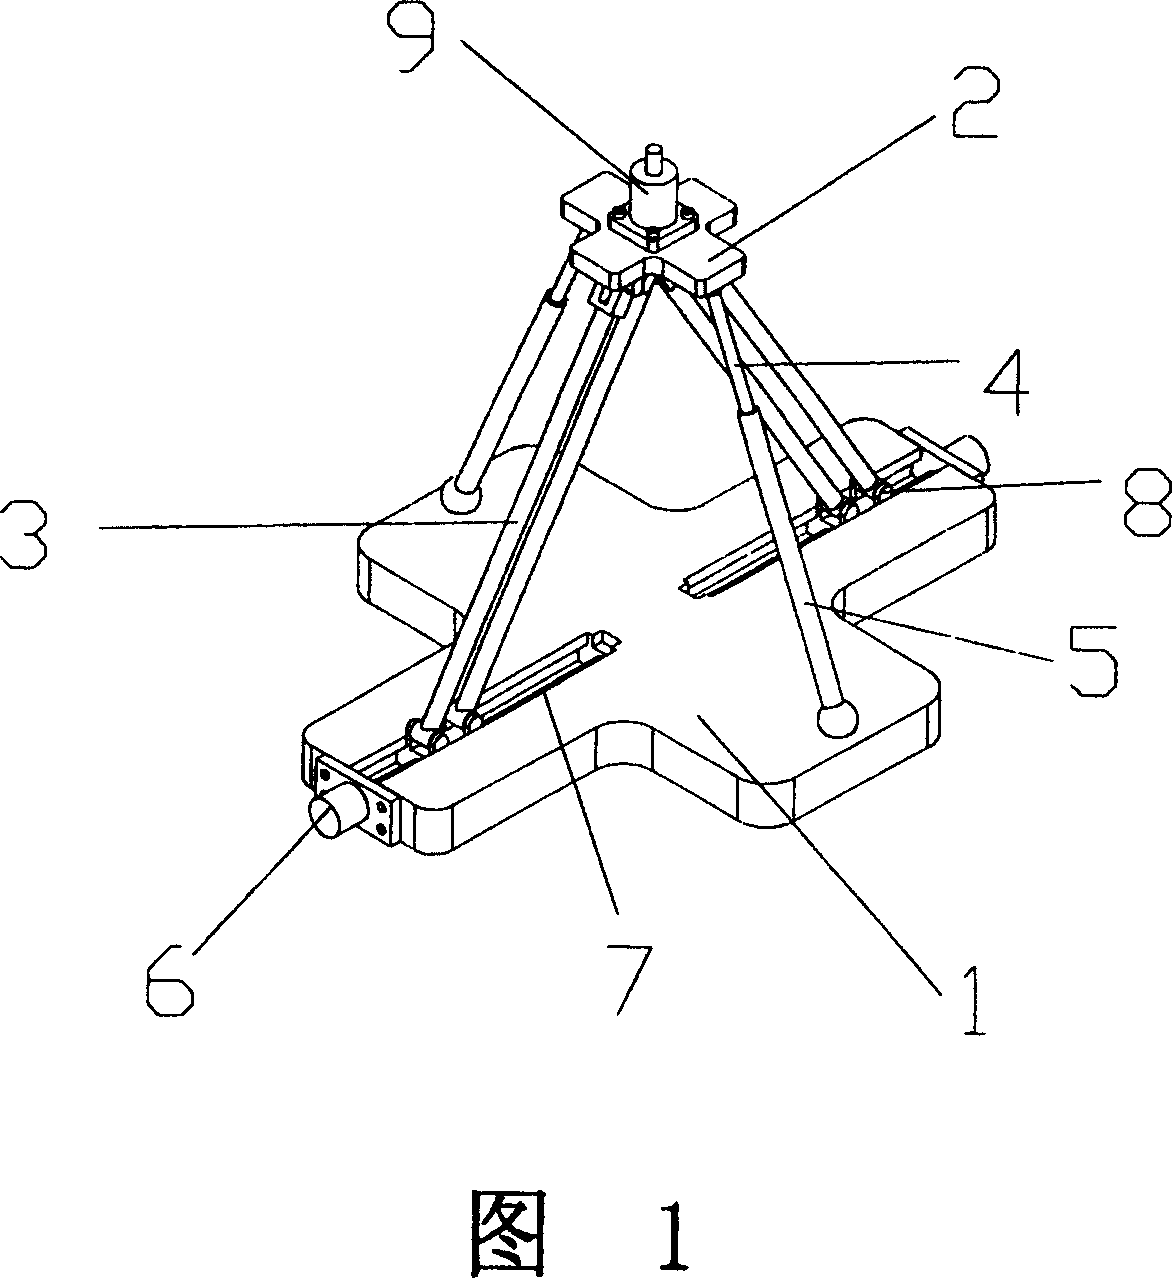 Two-freedom parallel-connecting mechanism with passive constrained branch